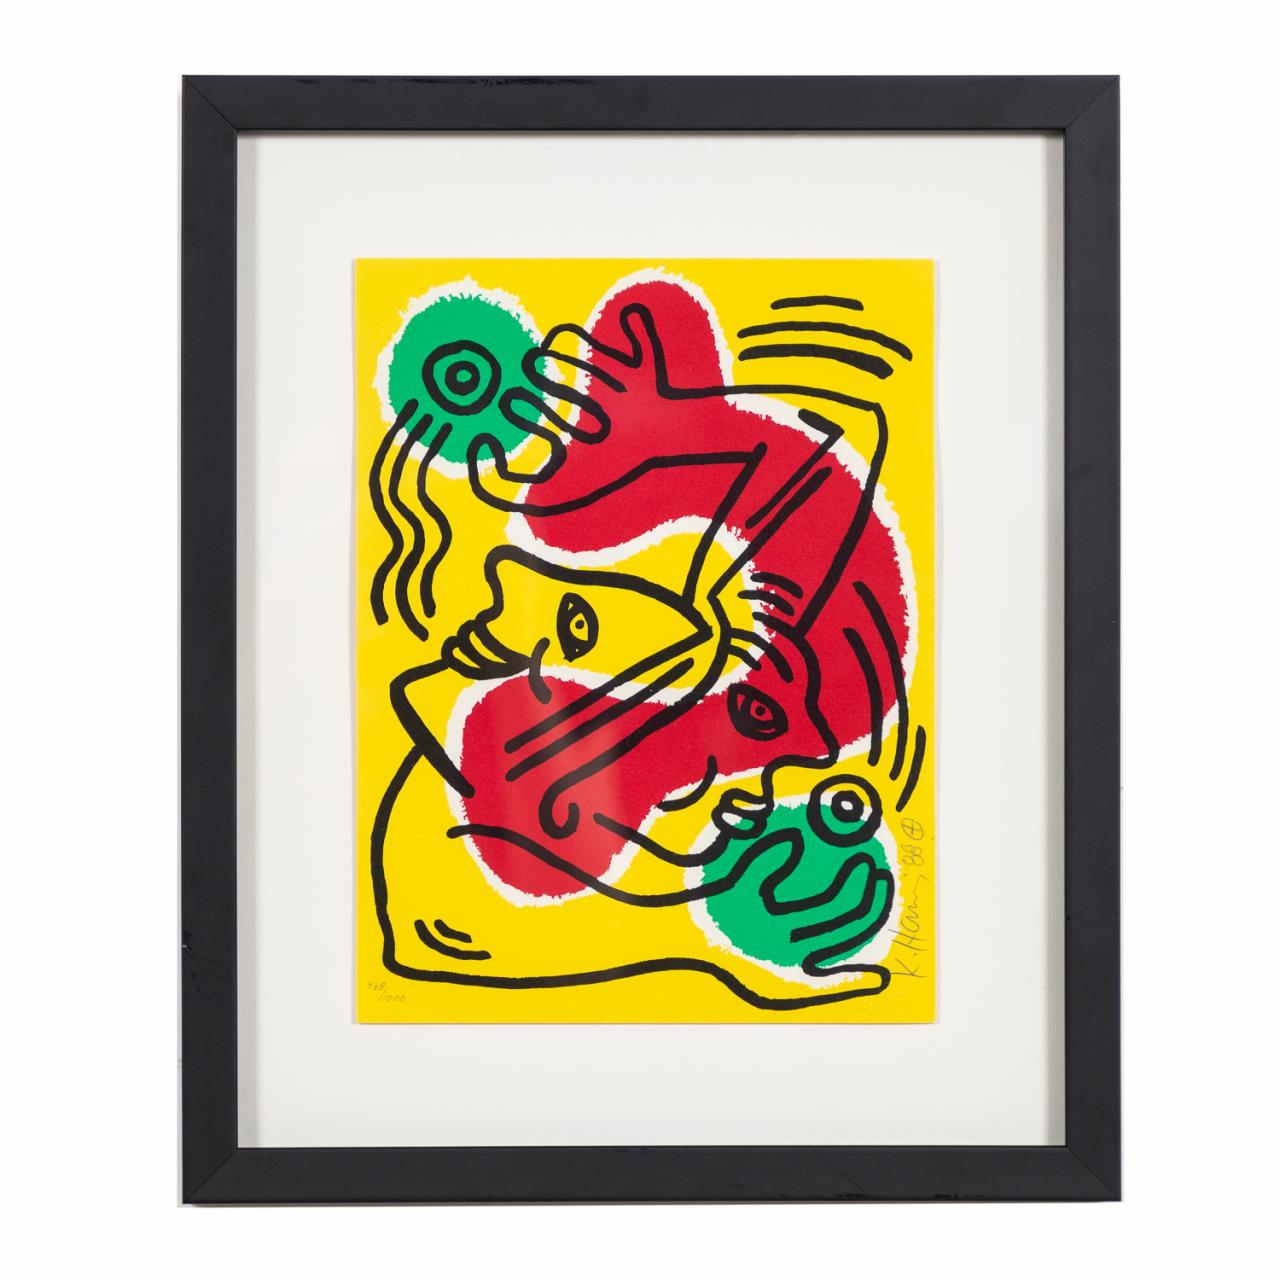 KEITH HARING POP ART LITHOGRAPH 35d75c